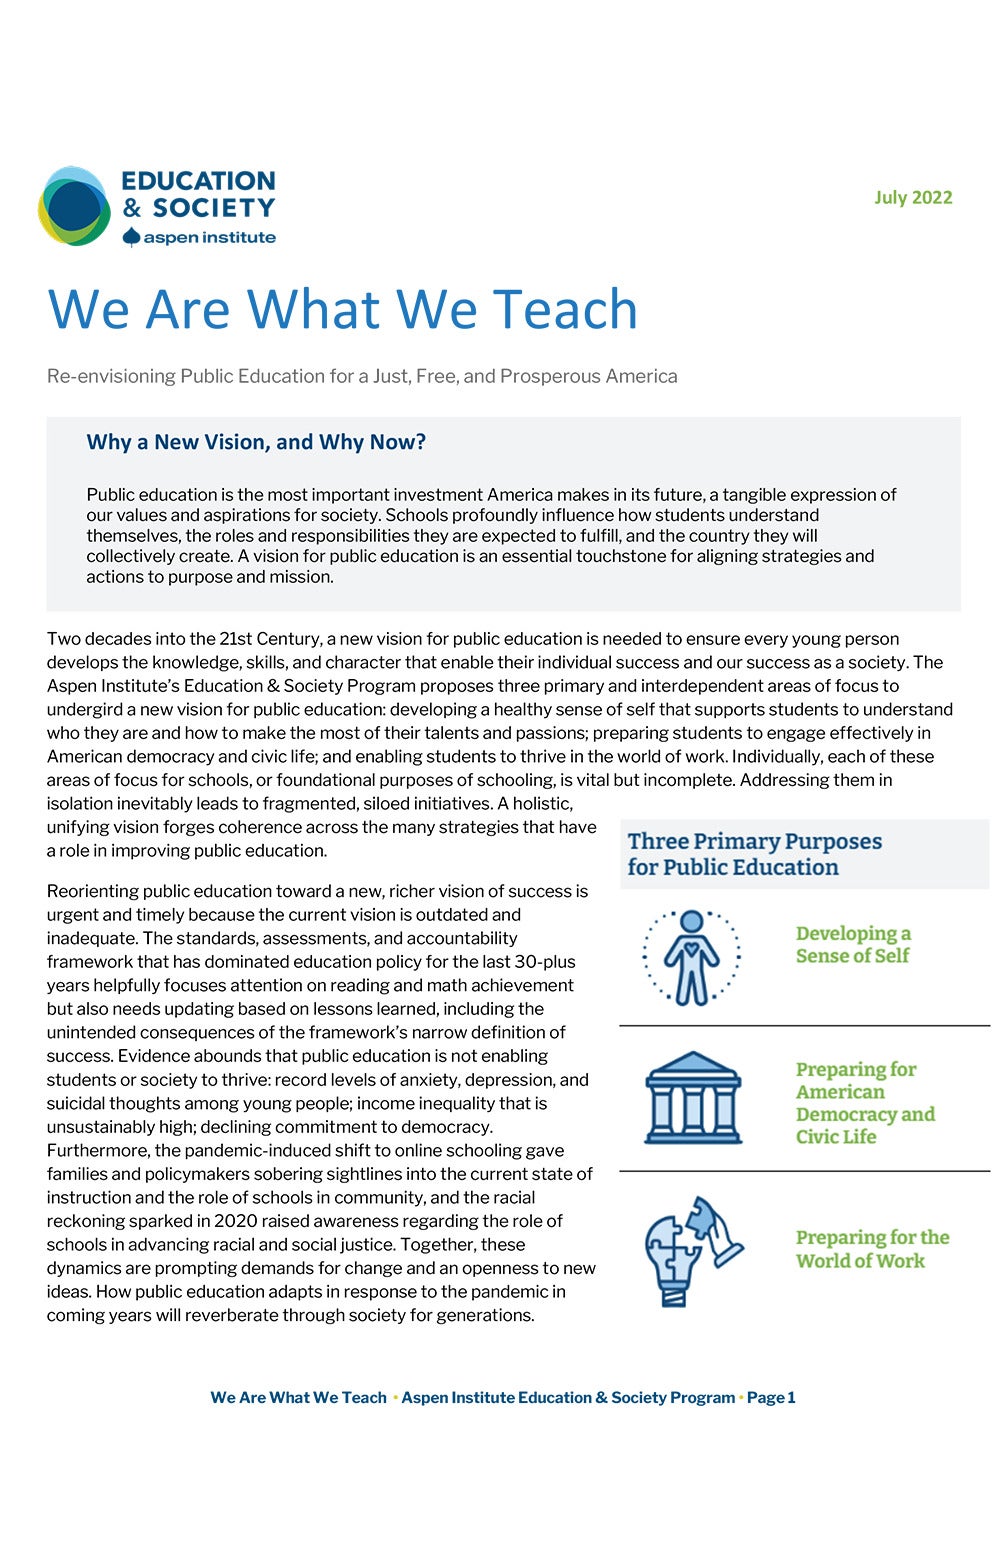 We Are What We Teach:<br>Re-envisioning Public Education for a Just, Free, and Prosperous America